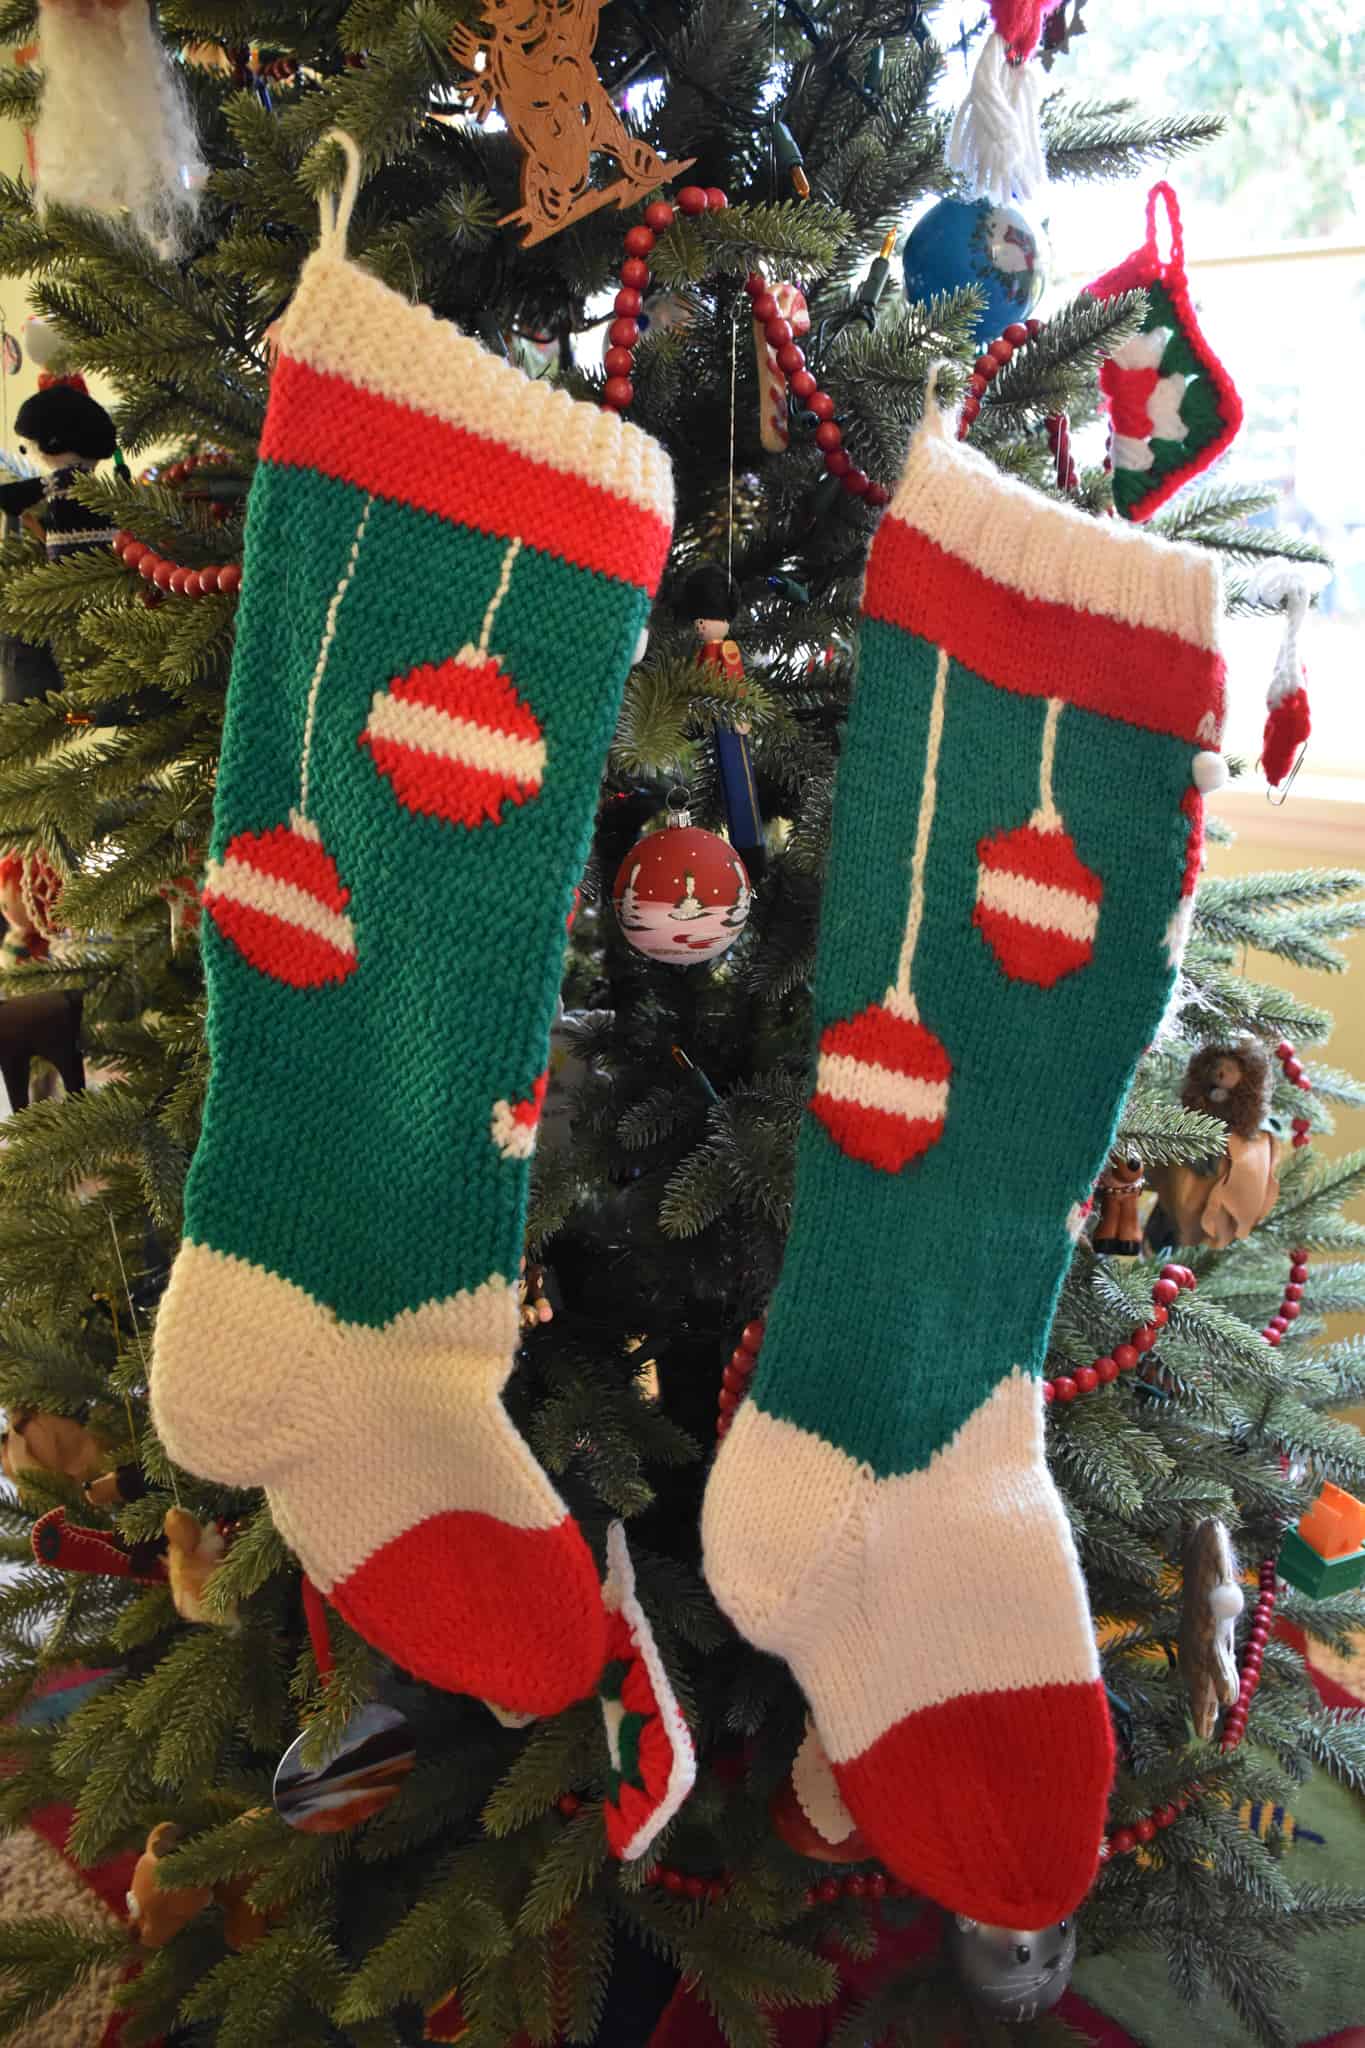 Green and red knitted Christmas stockings with tree ornaments.